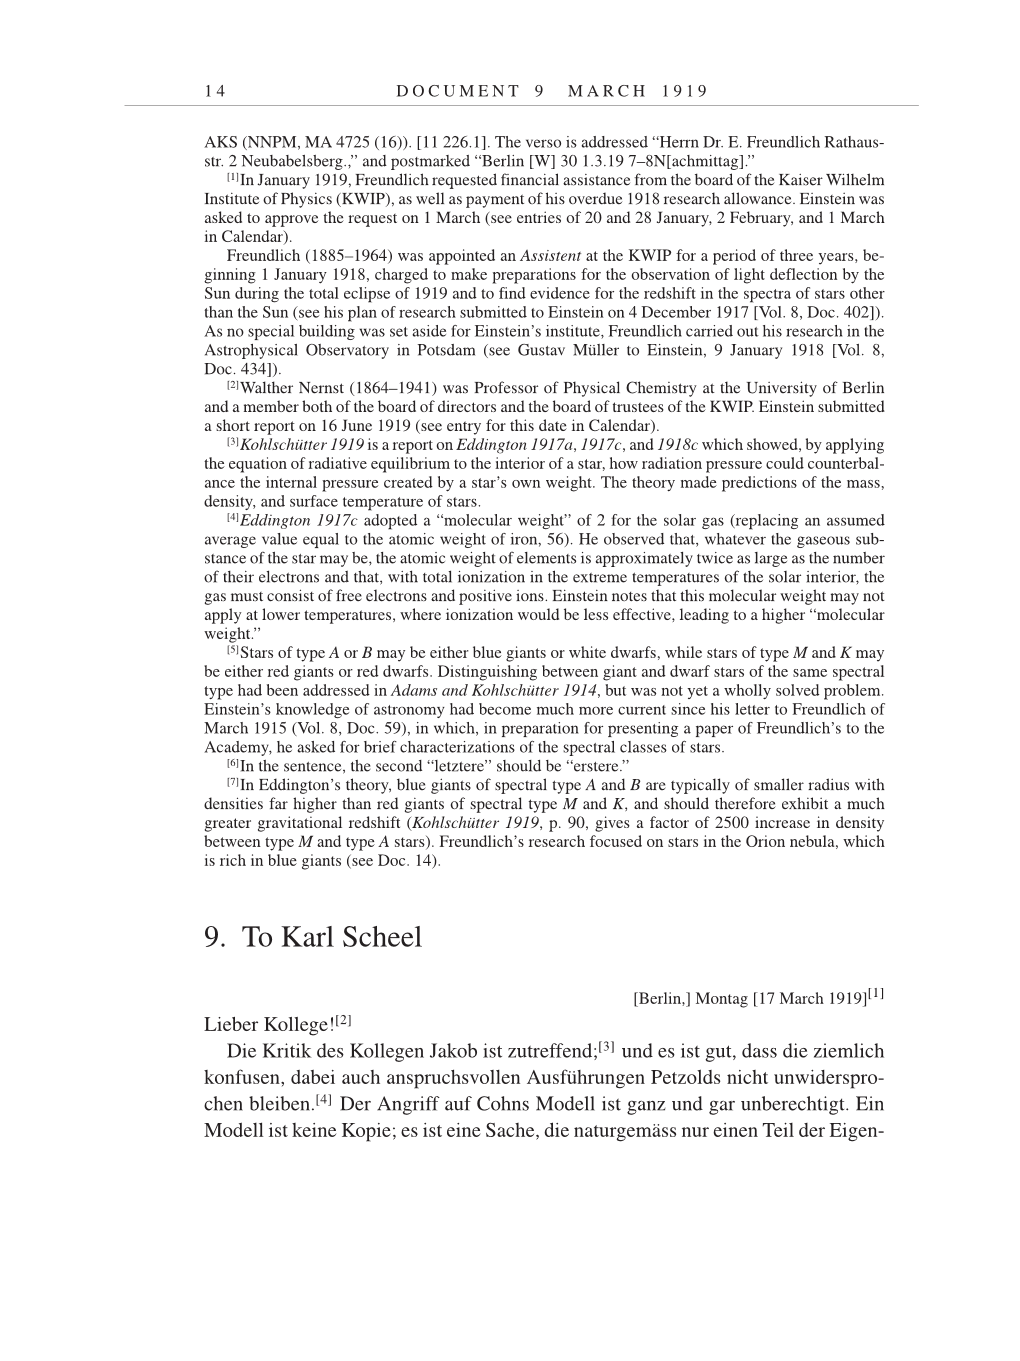 Volume 9: The Berlin Years: Correspondence January 1919-April 1920 page 14